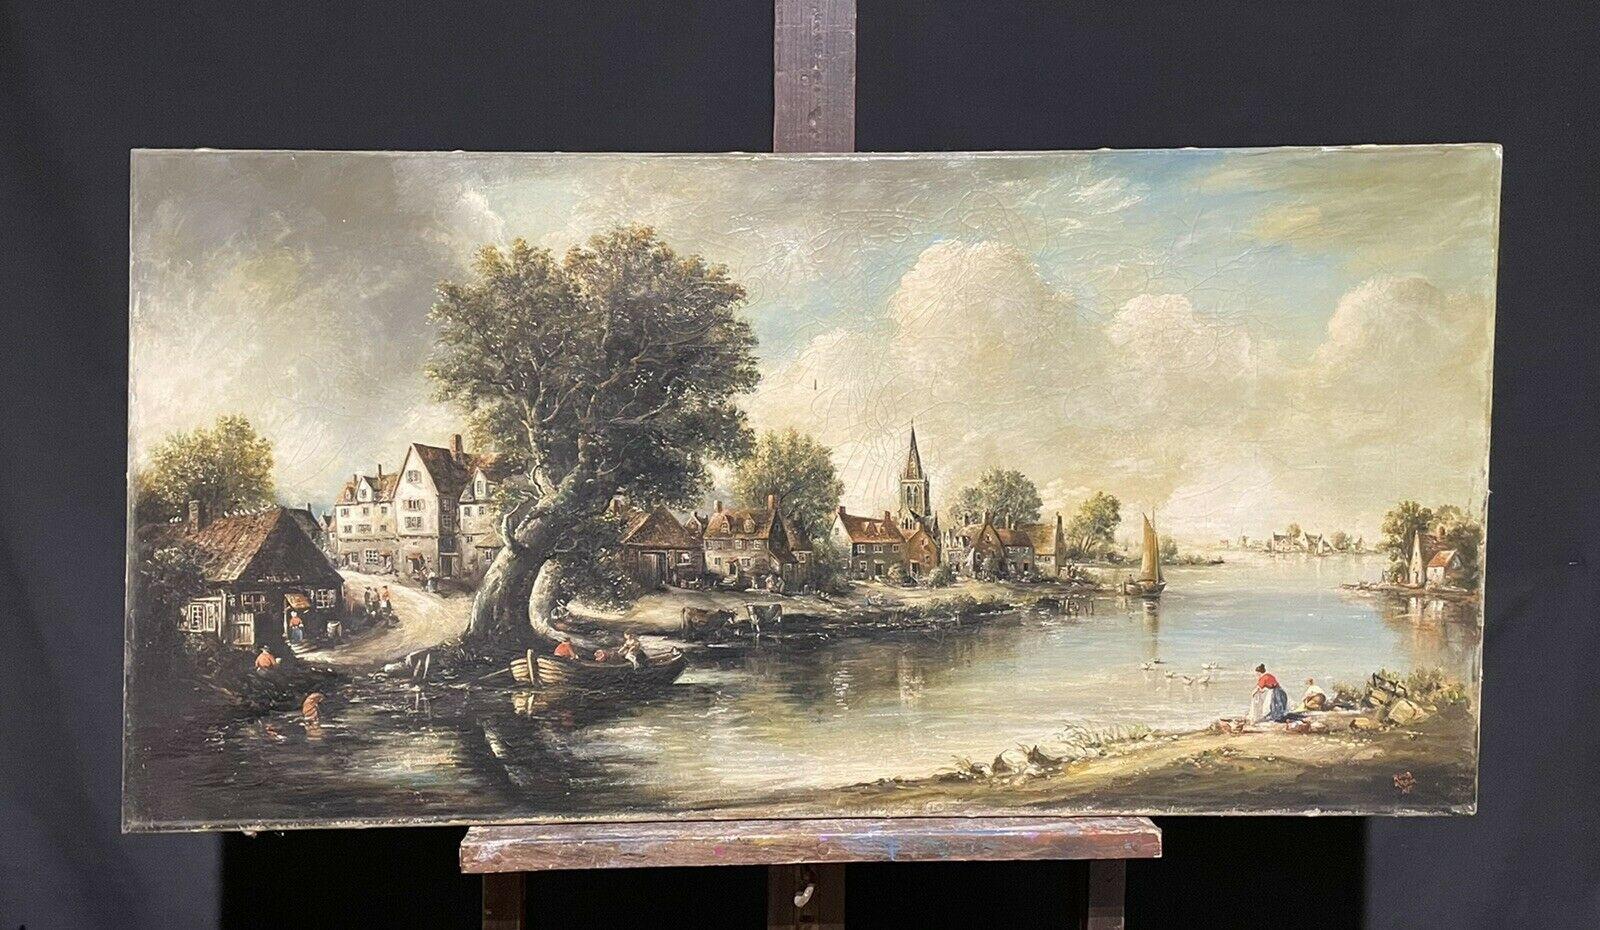 HUGE ANTIQUE BRITISH OIL PAINTING RIVER LANDSCAPE & BUILDINGS - SIGNED RIMA - Painting by Norman French